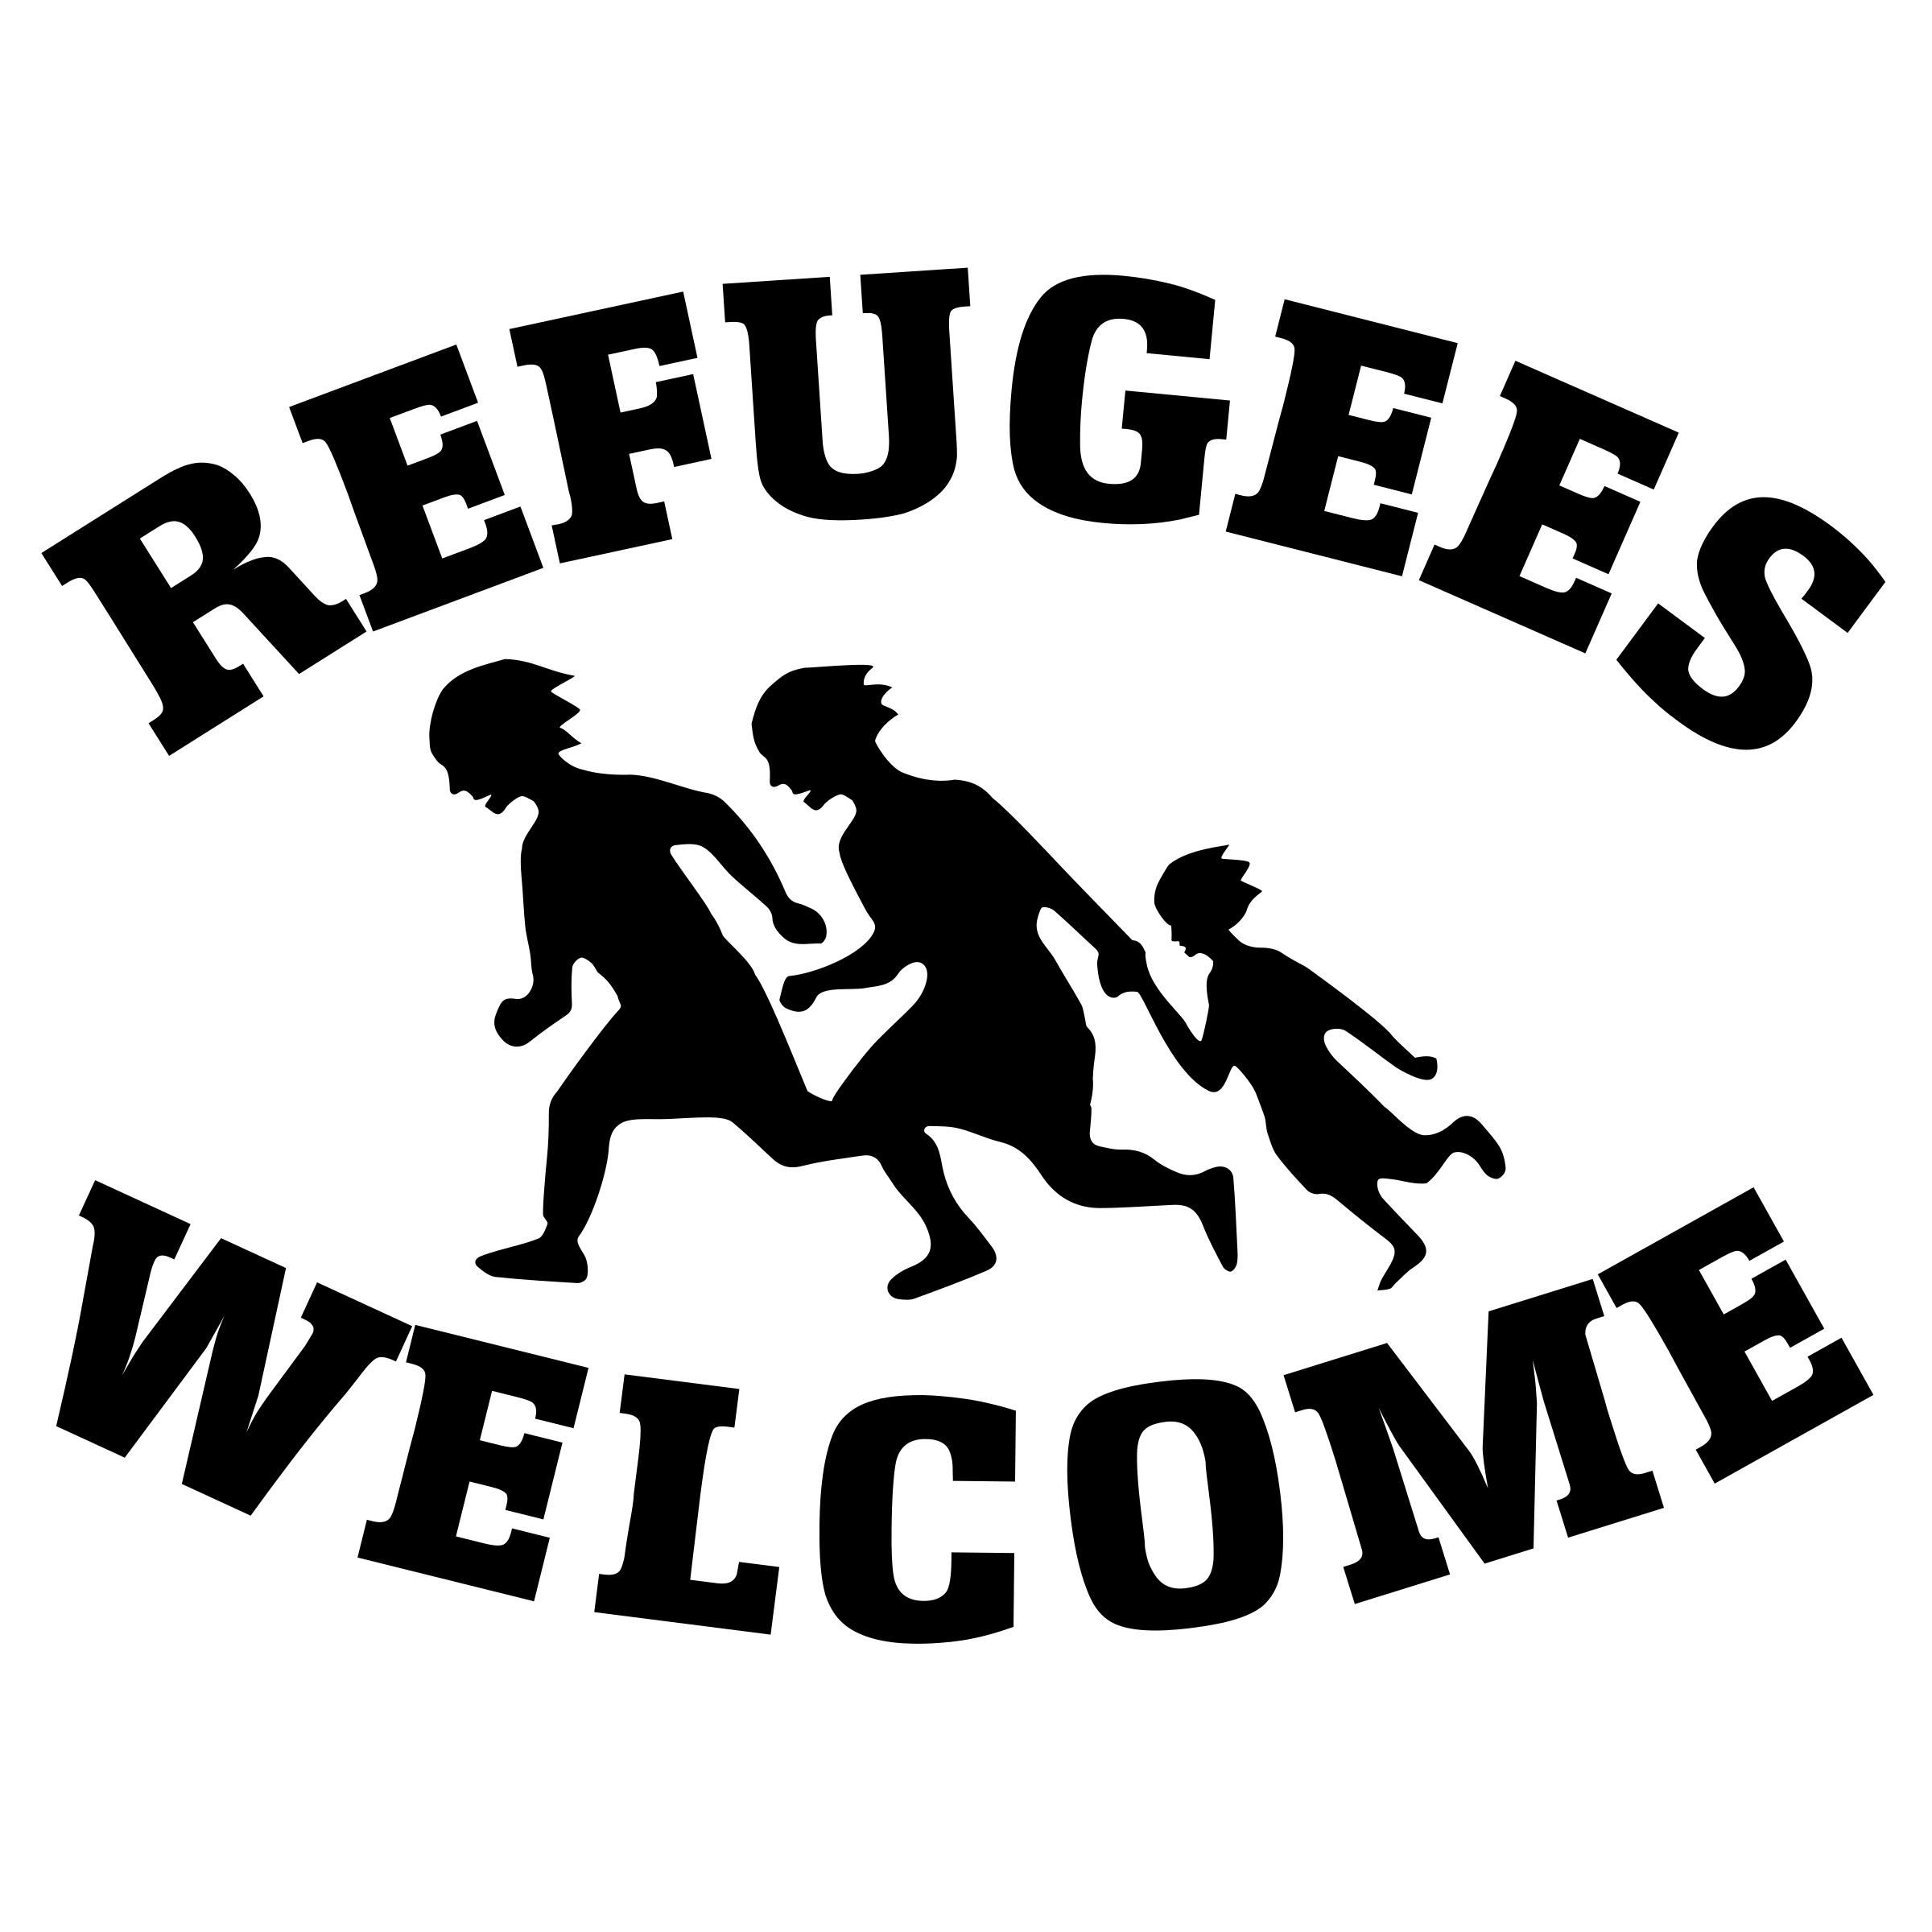 Refugees Welcome (not so heteronormative) icons